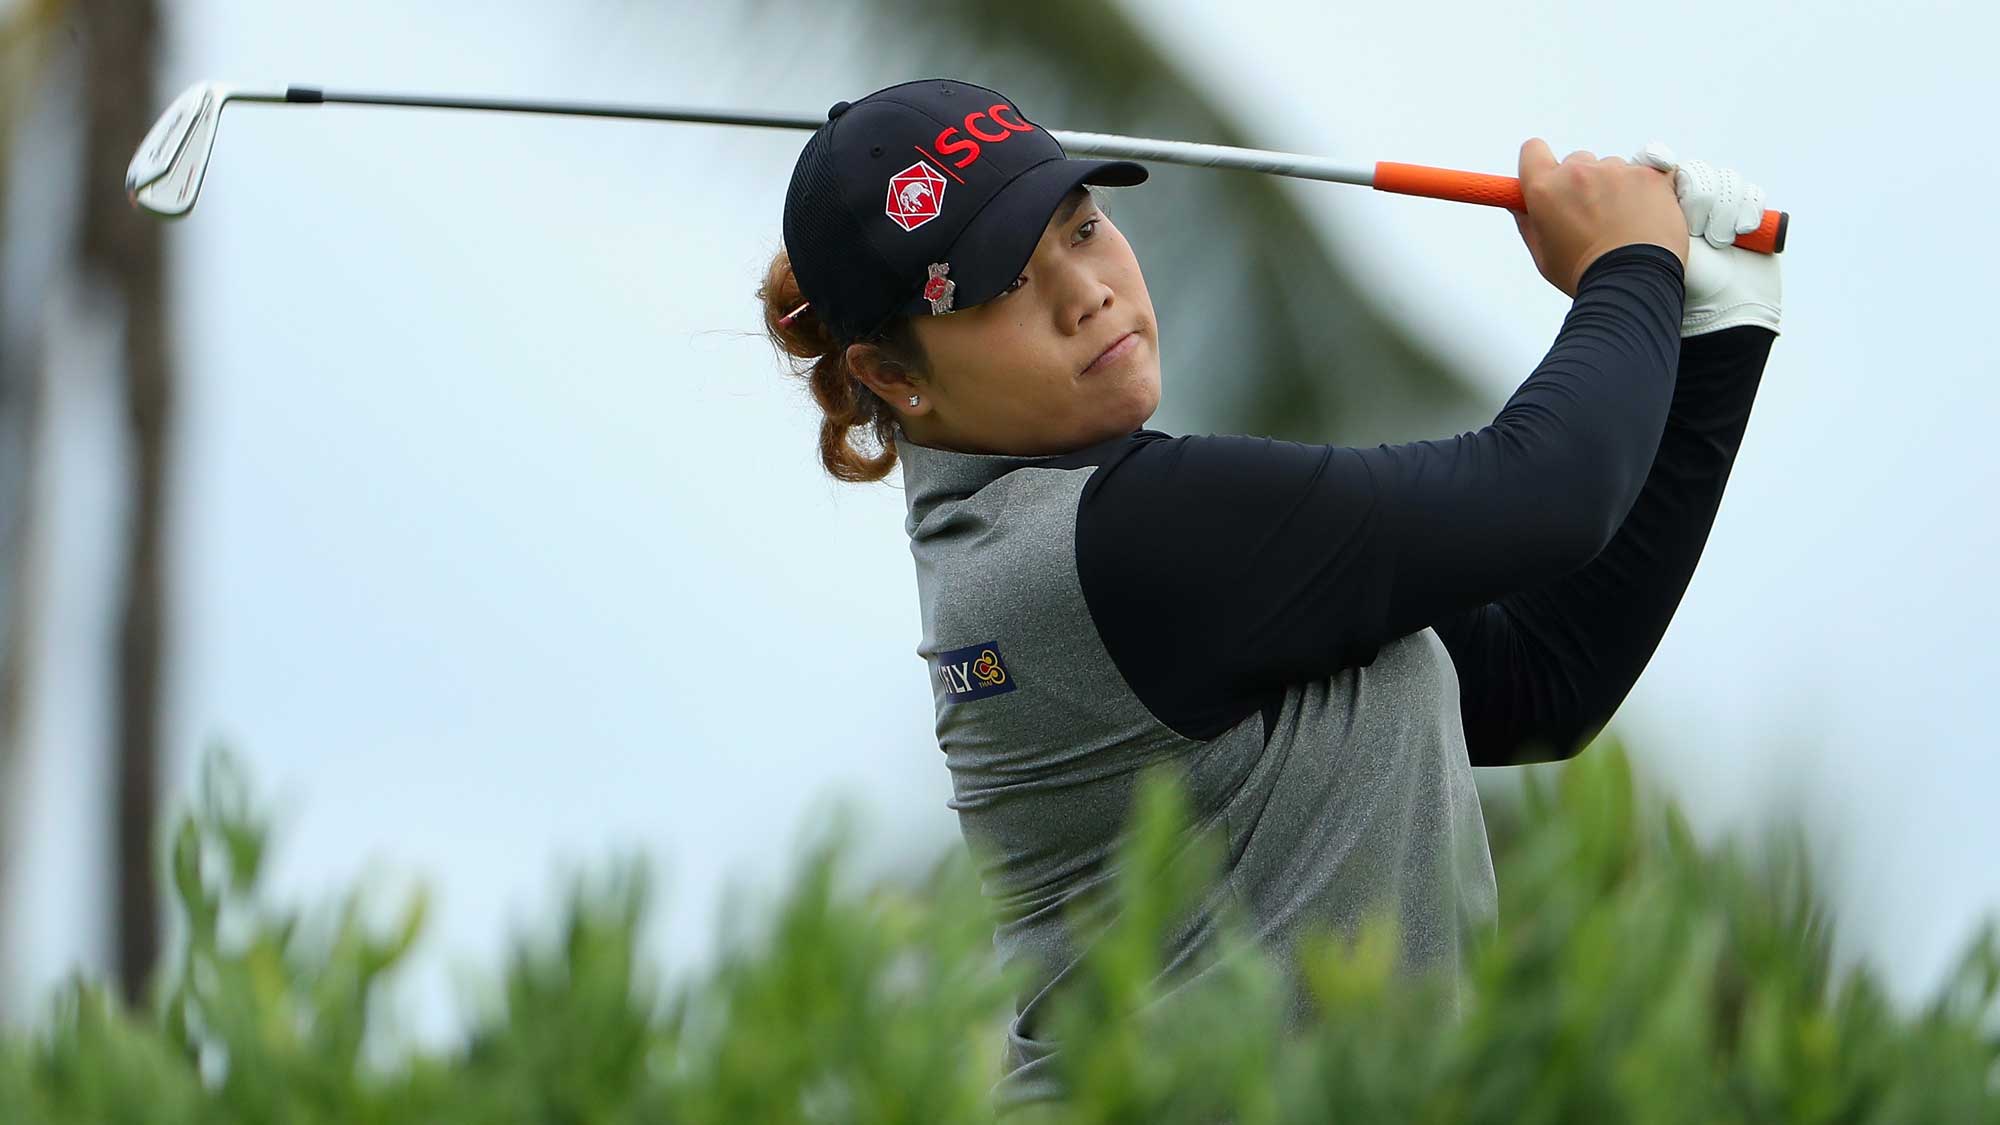 Ariya Jutanugarn of Thailand plays a tee shot on the 13th hole during the second round of the LPGA LOTTE Championship Presented By Hershey